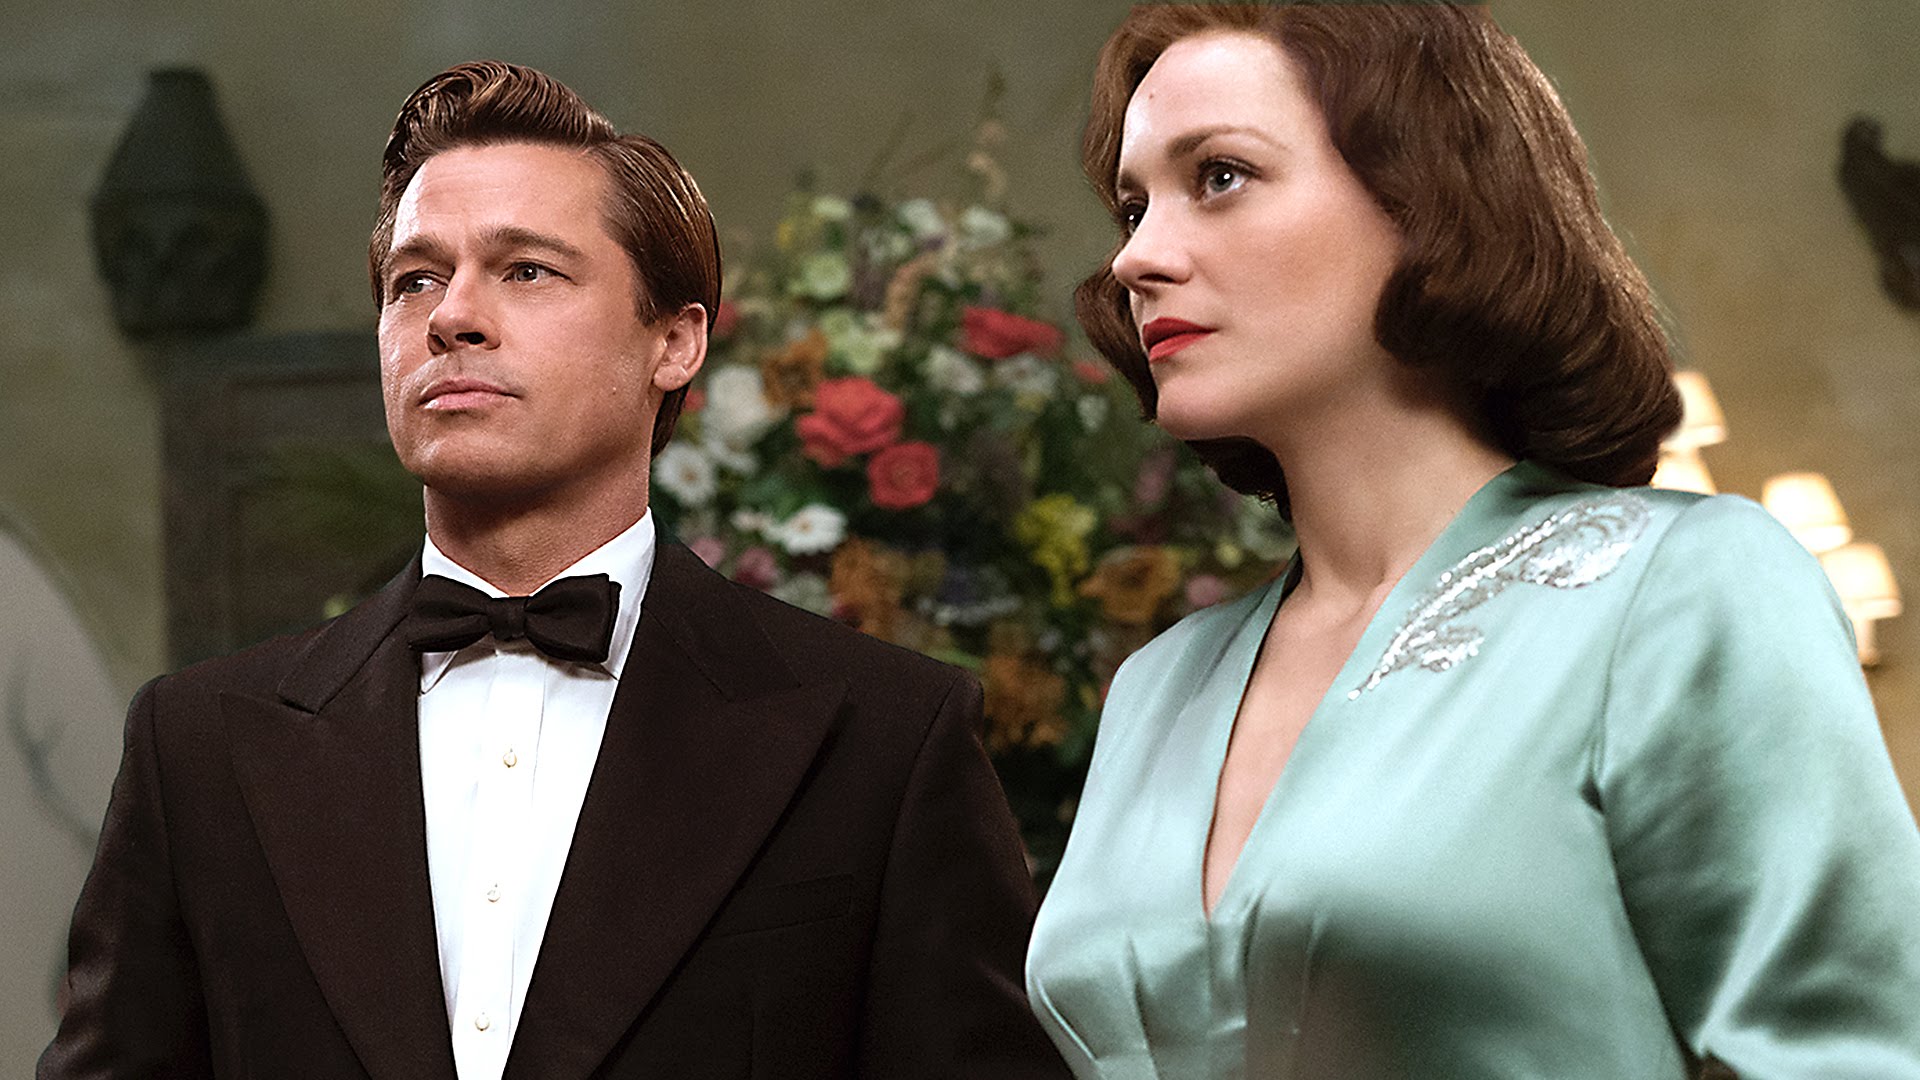 Digital & Dissected: Allied (DVD/Blu-Ray)